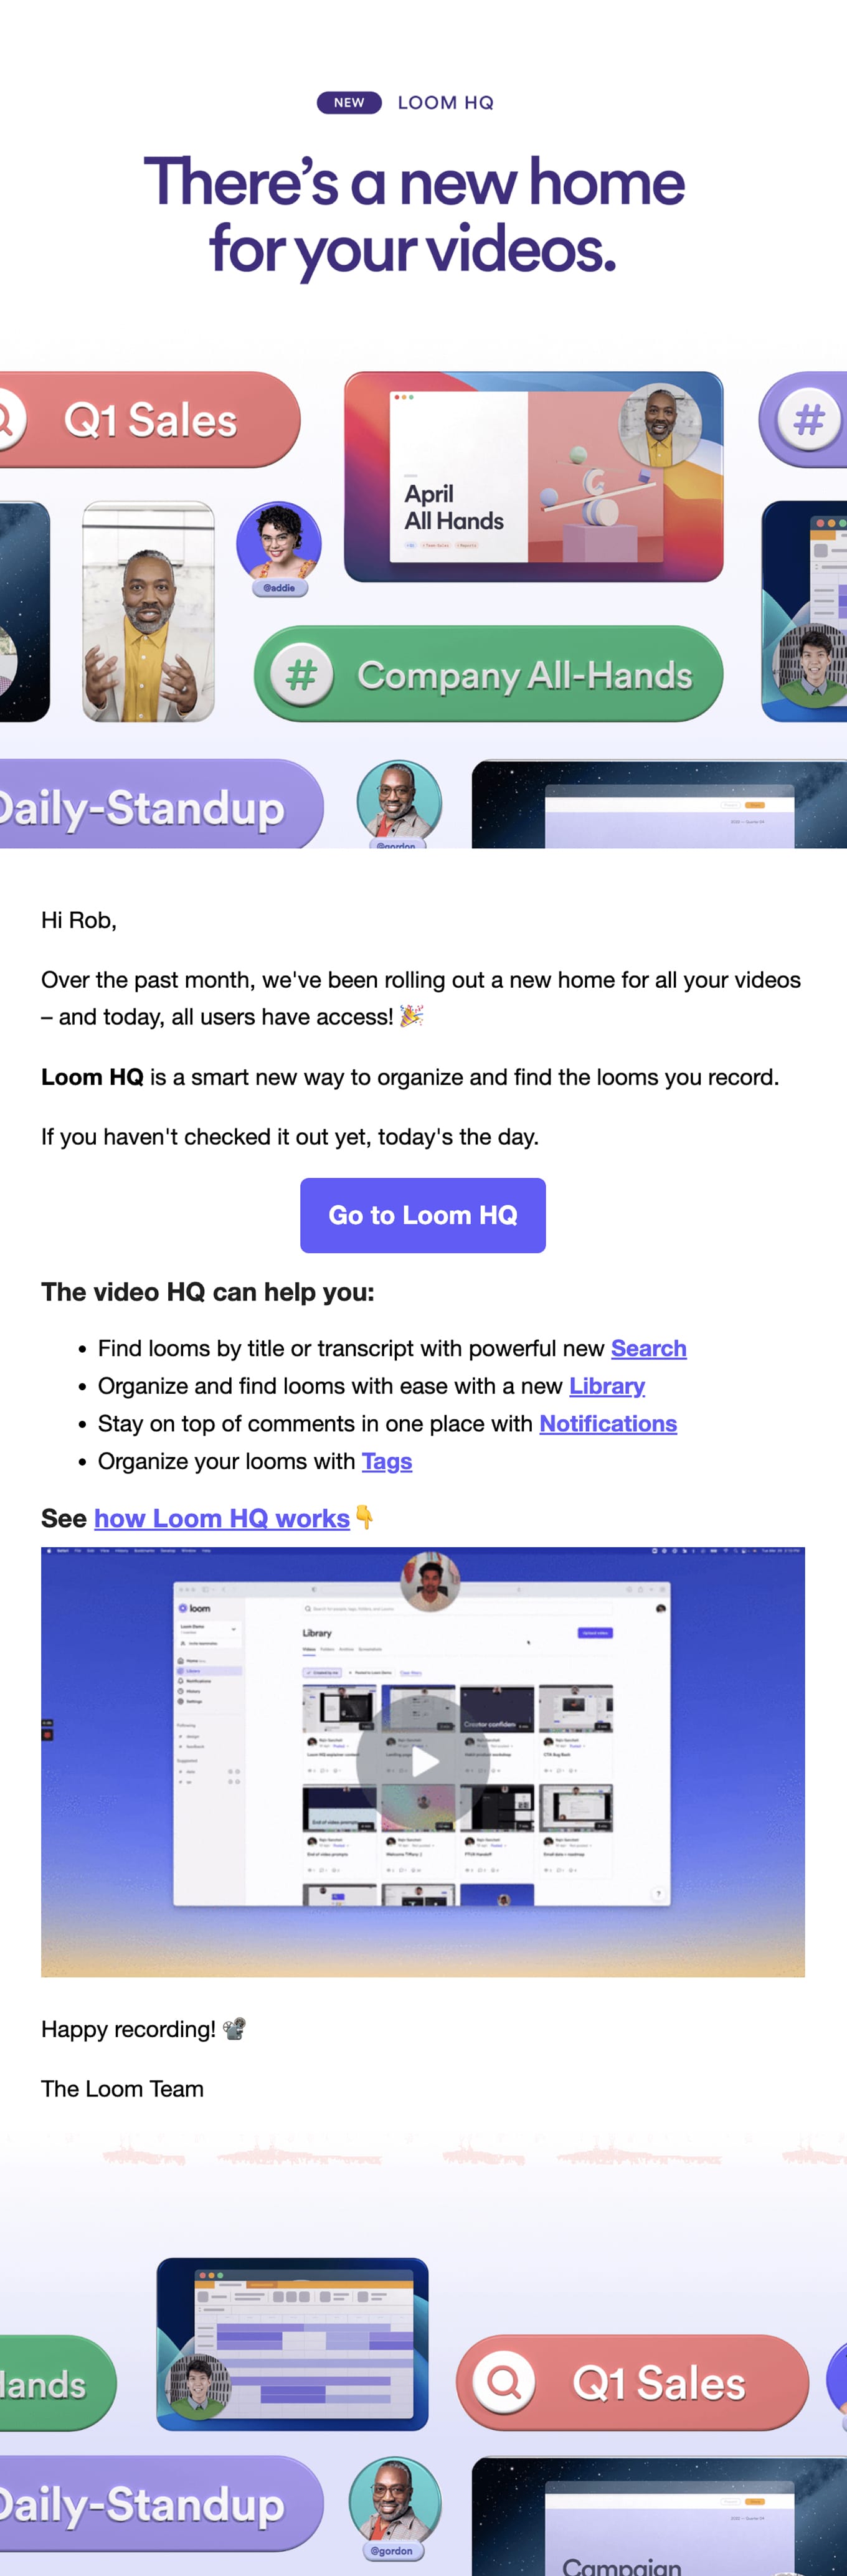 Today’s the day – checkout Loom… Email Screenshot